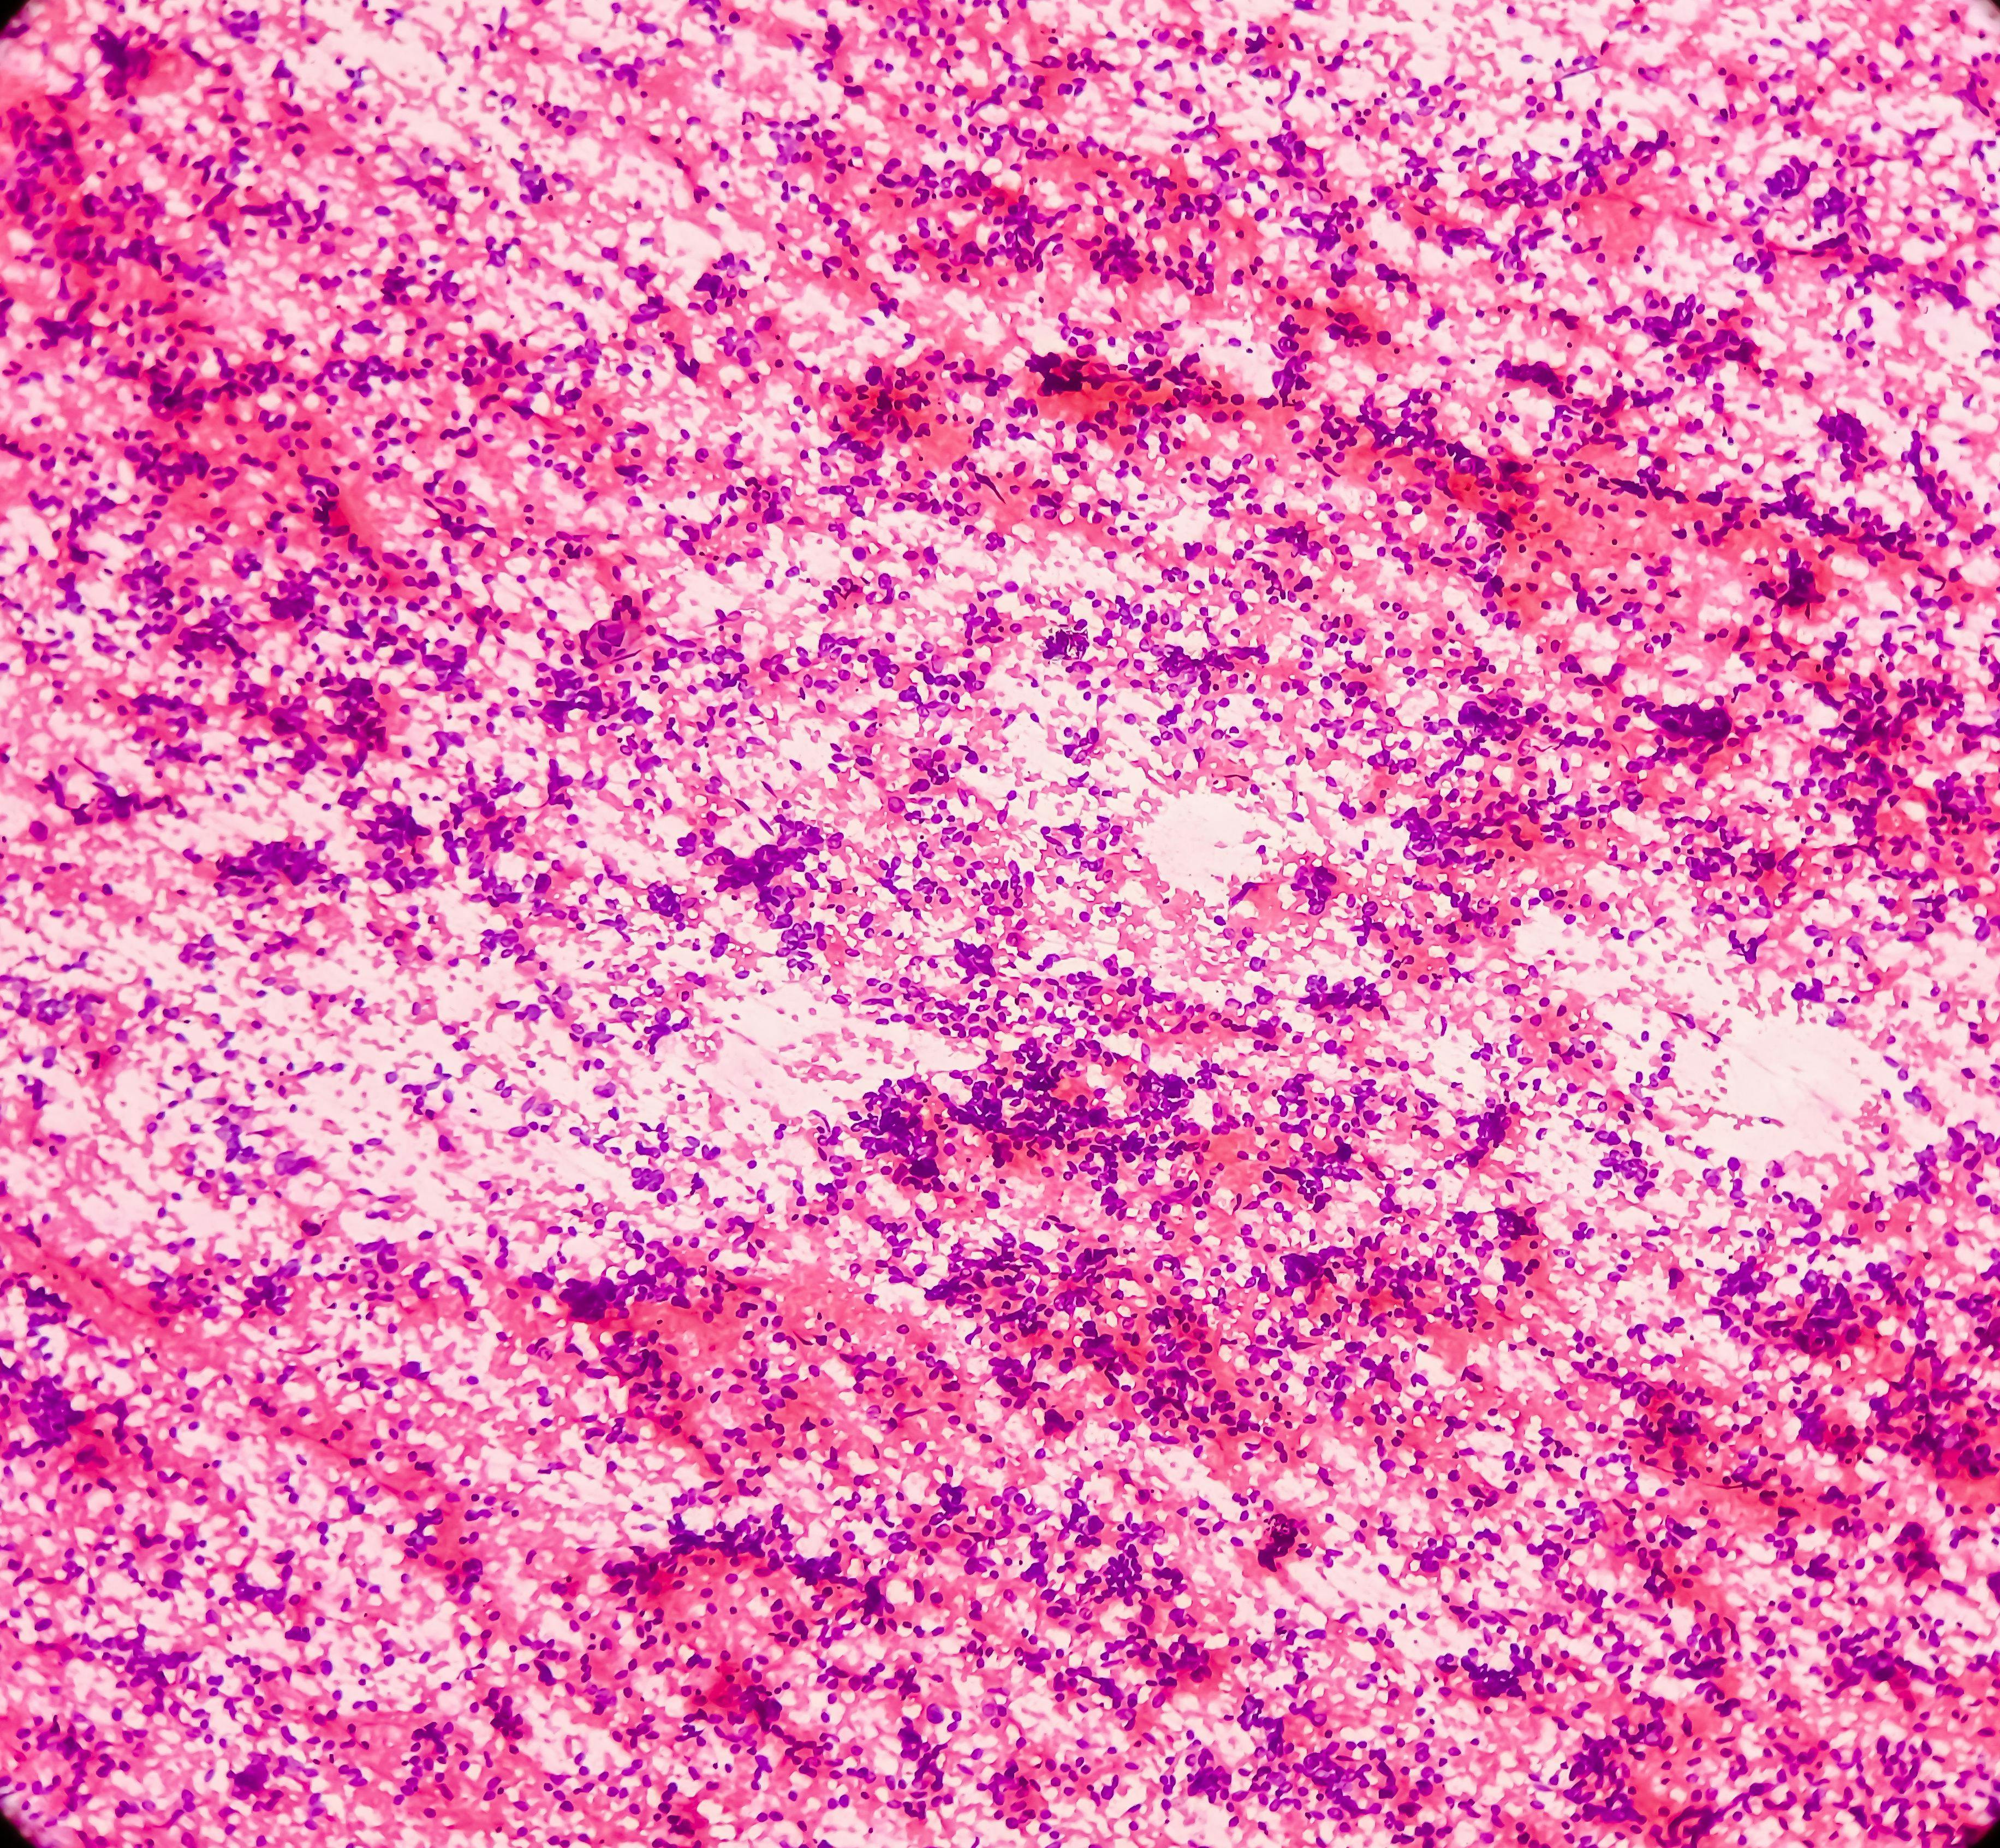 Lung cancer, photomicrograph of small cell carcinoma, malignant cells, sample sapirate from lung mass by CT guided FNA, show atypical small round cells, granular salt pepper chromatin | Image Credit: © MdBabul - www.stock.adobe.com